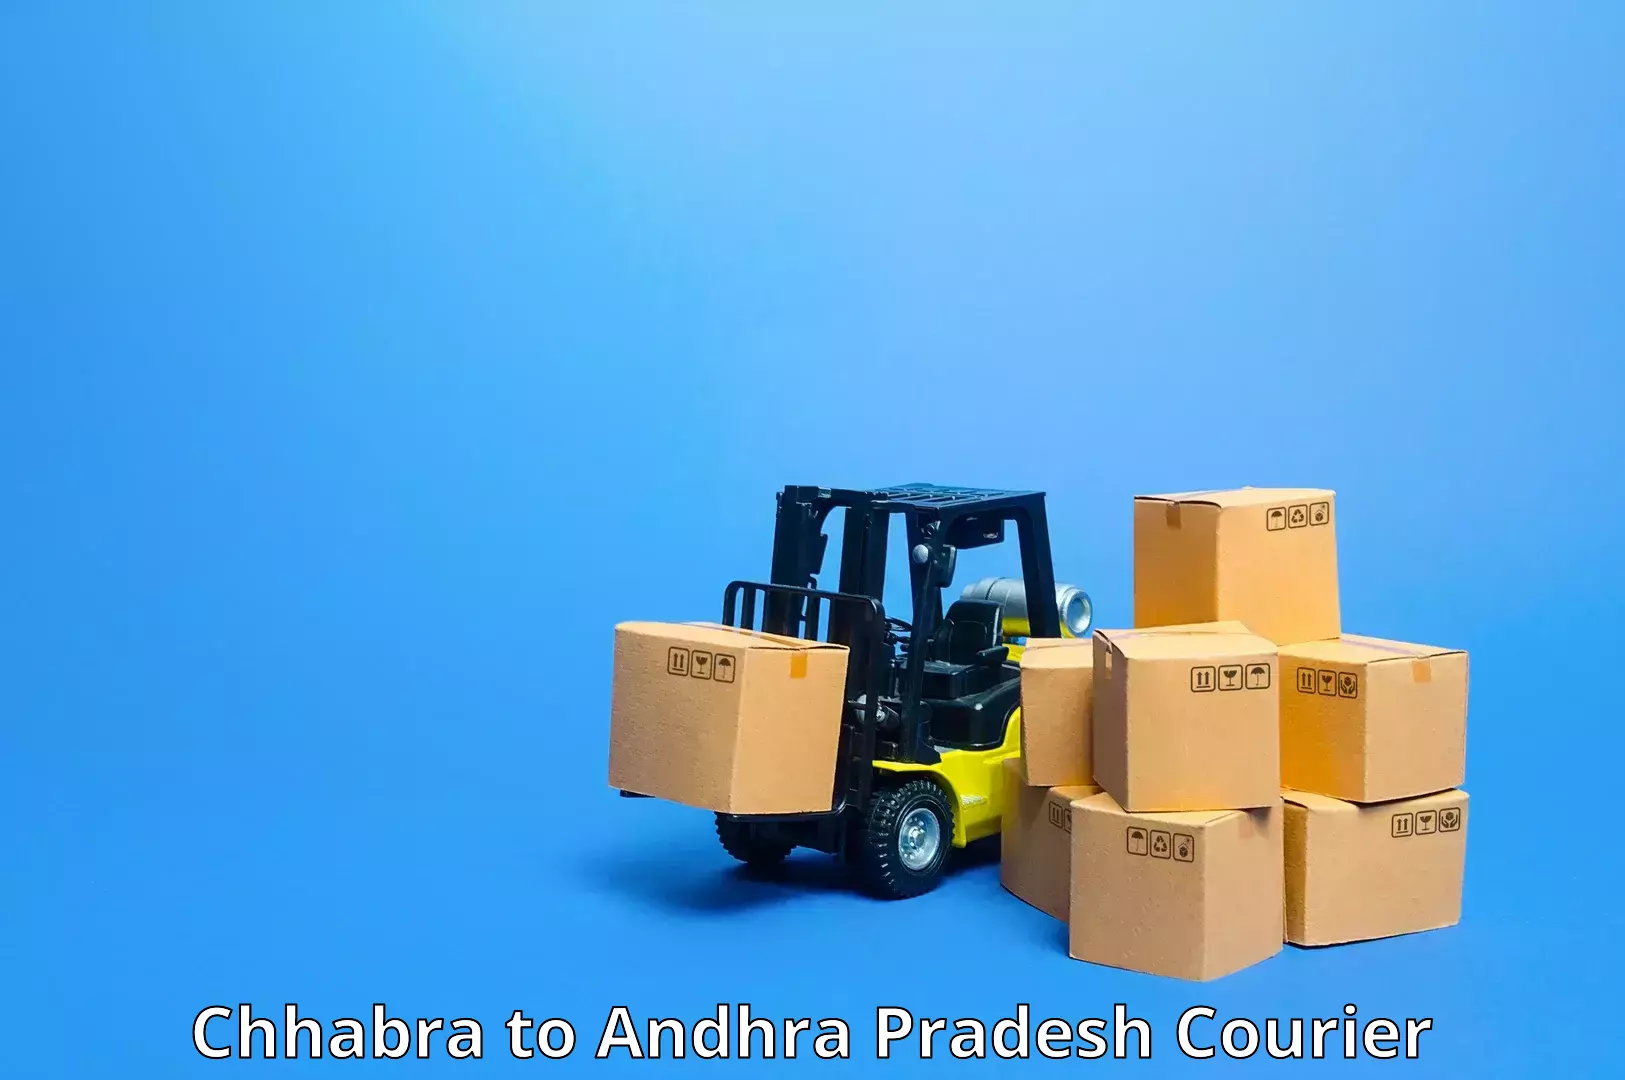 Courier dispatch services Chhabra to Mangalagiri